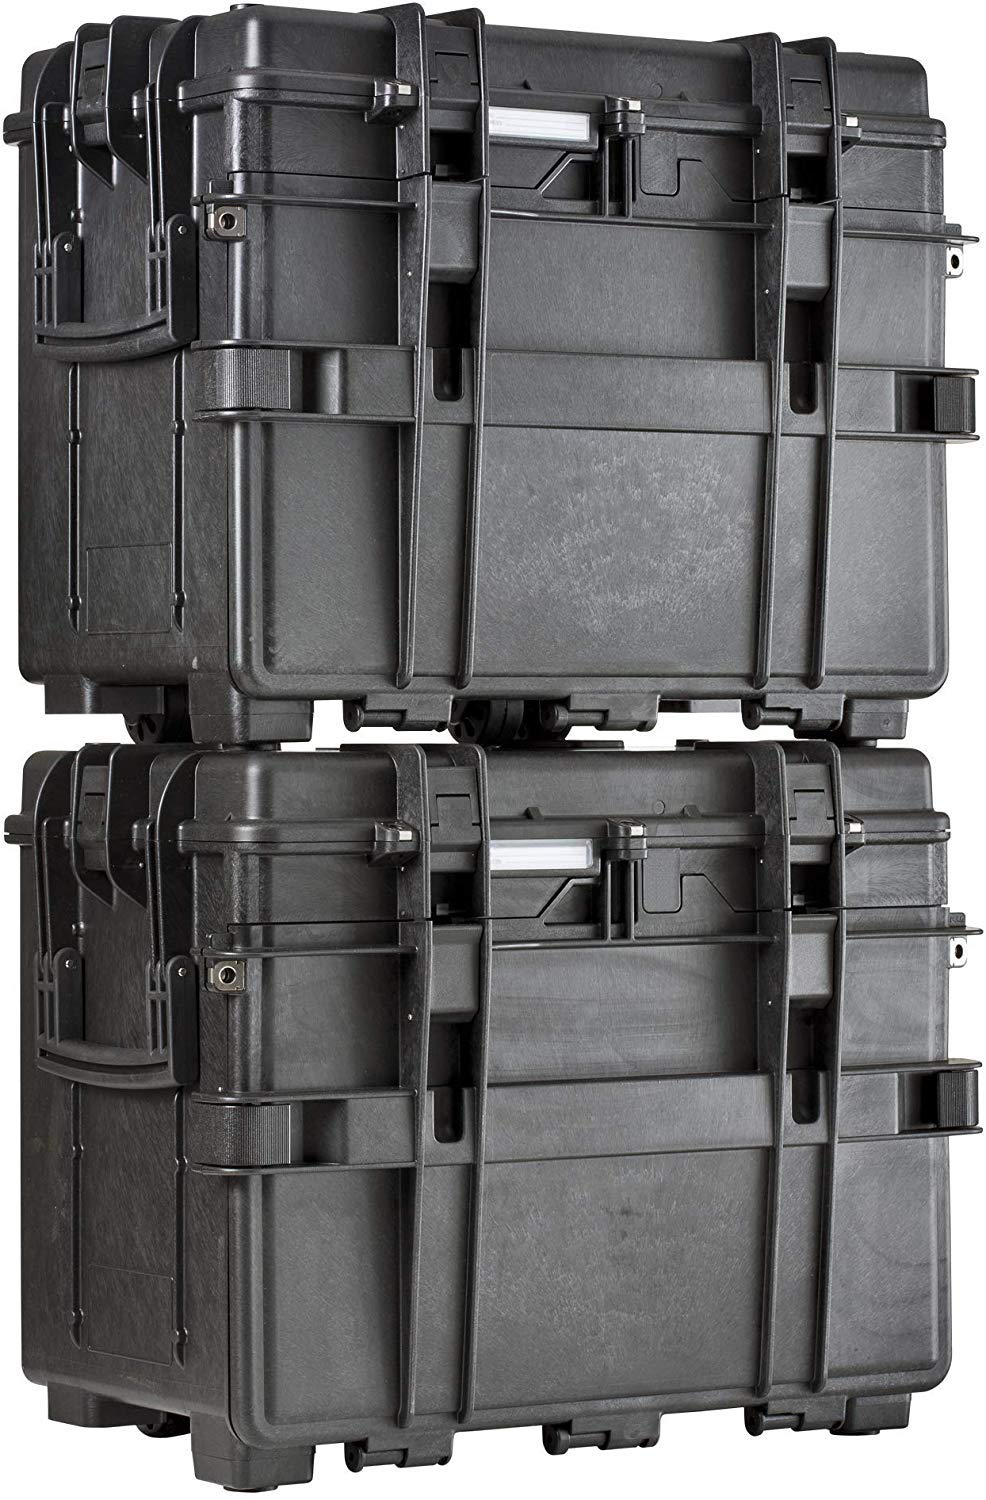 Mobile Tool Chest With Drawers, Military Grade, NATO Certified, Waterproof, Stackable, Lockable, Impact Resistant